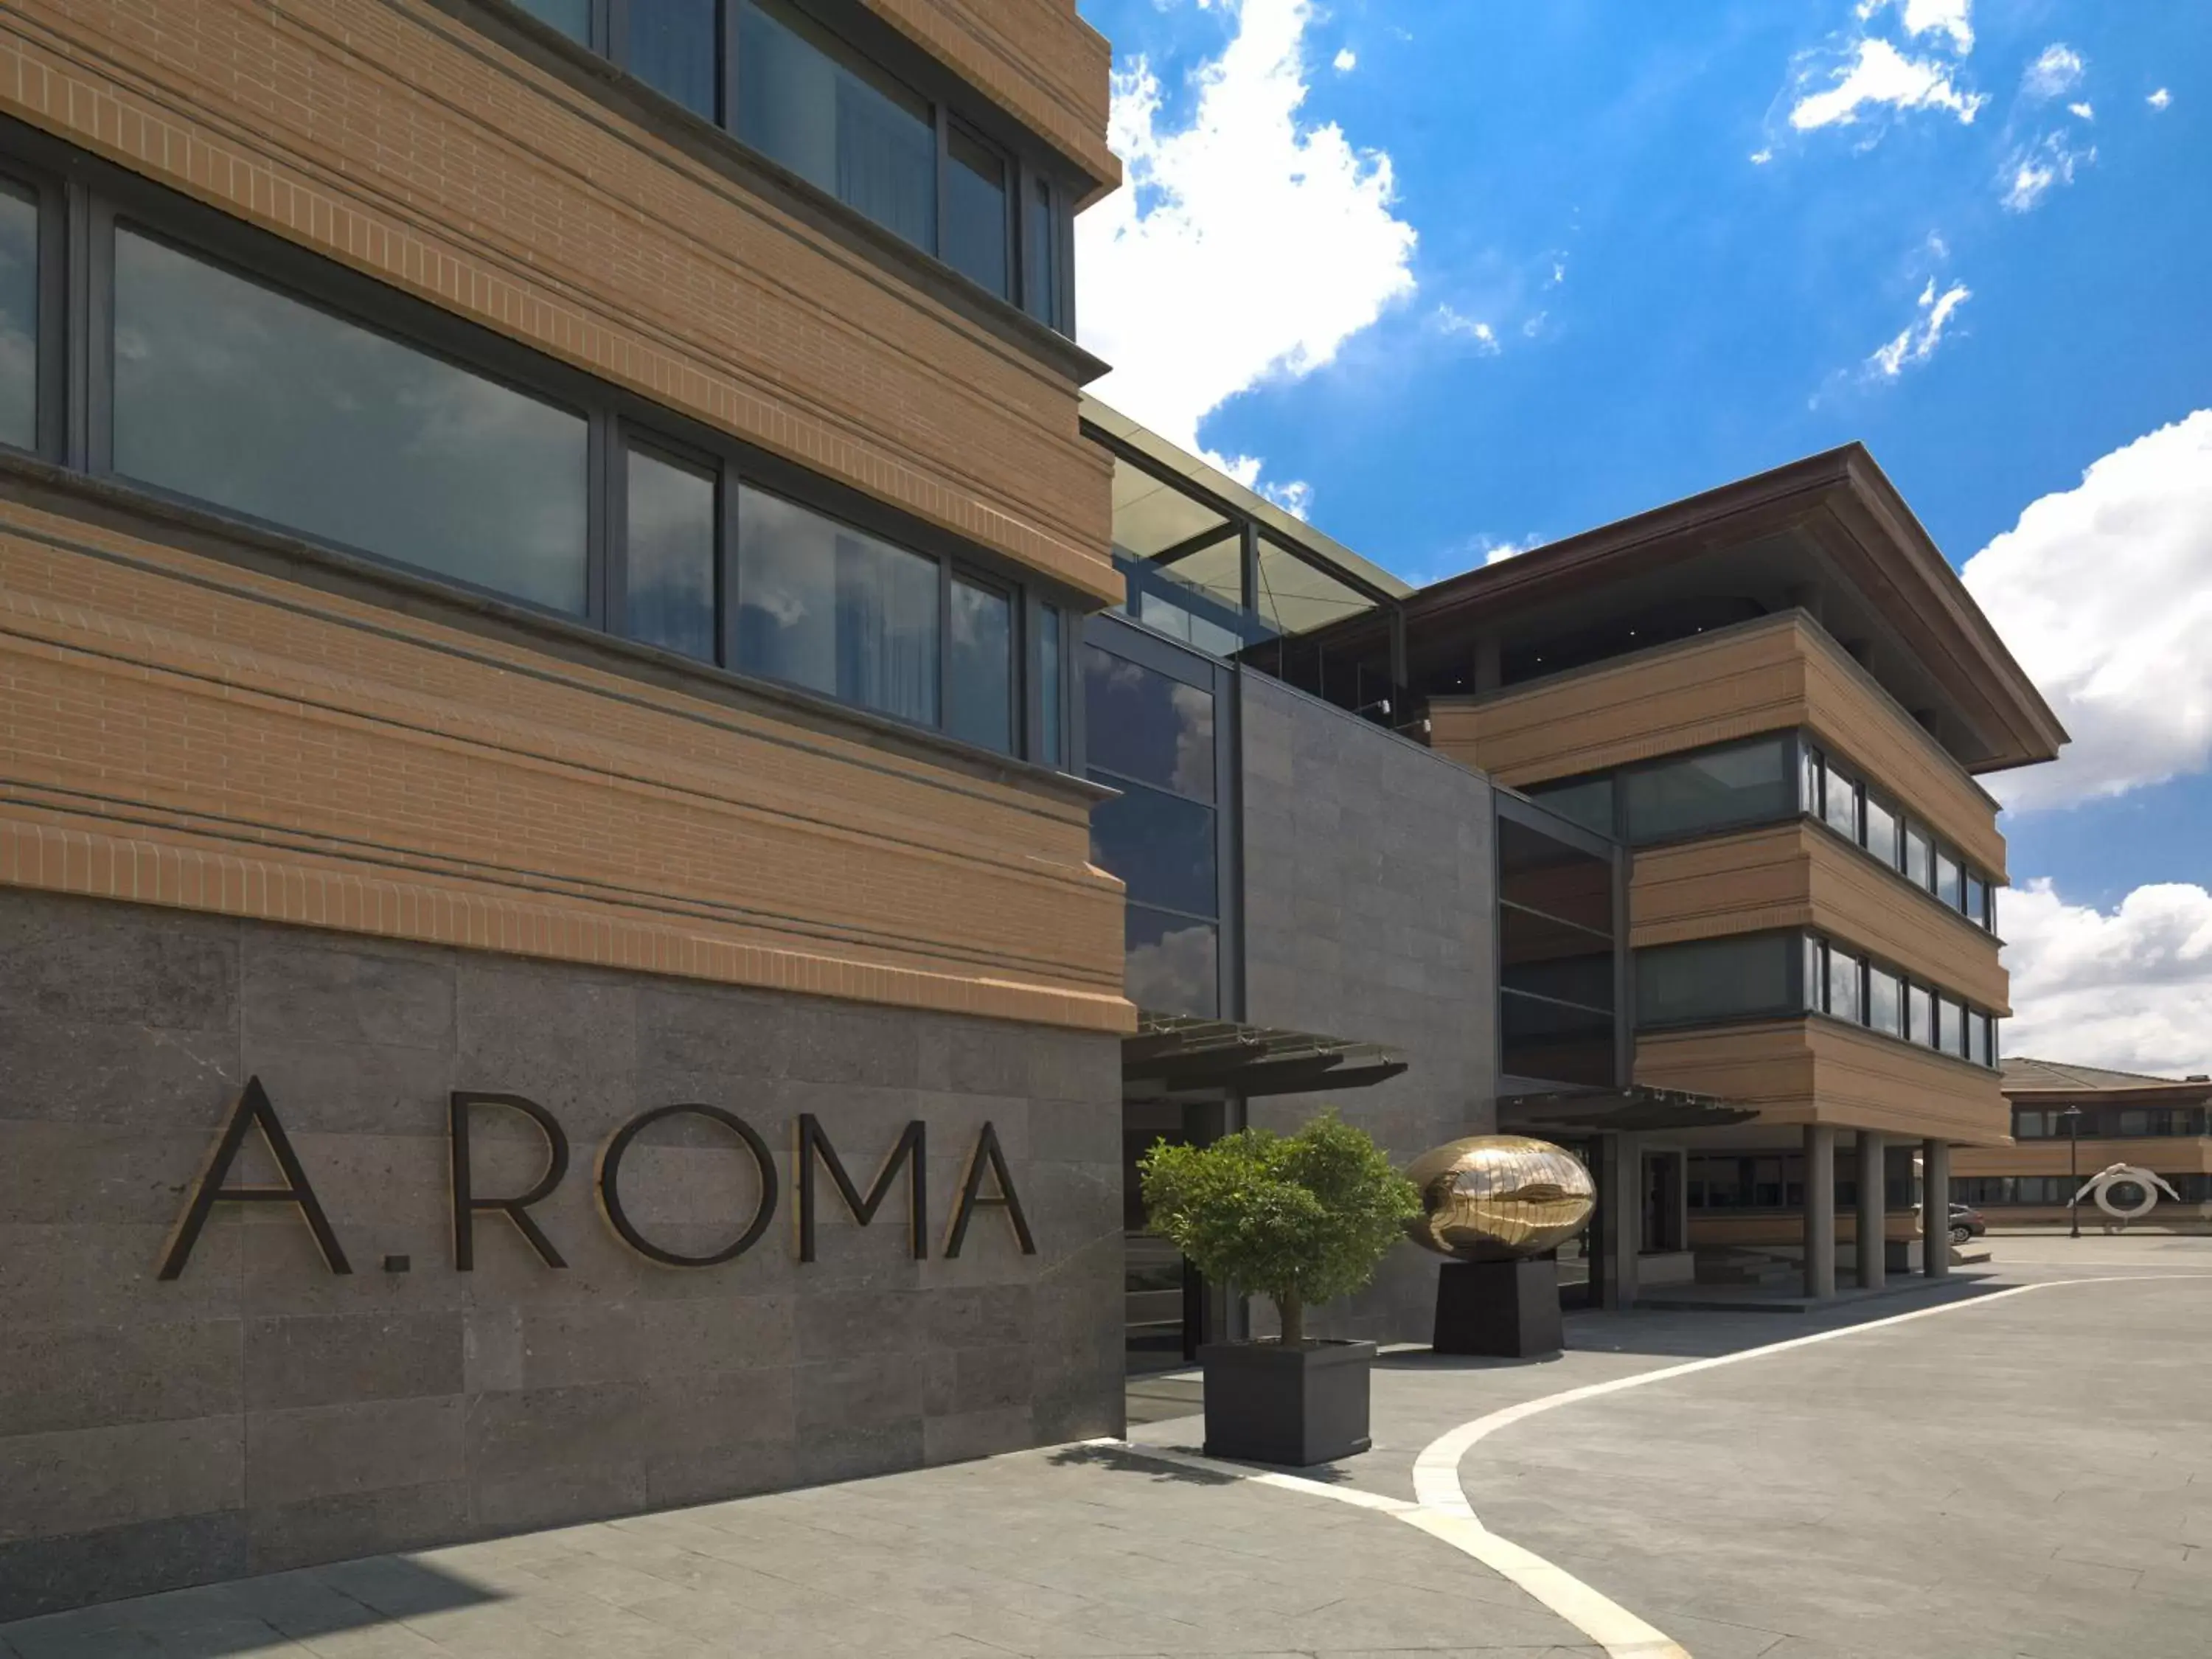 Property Building in A.Roma Lifestyle Hotel